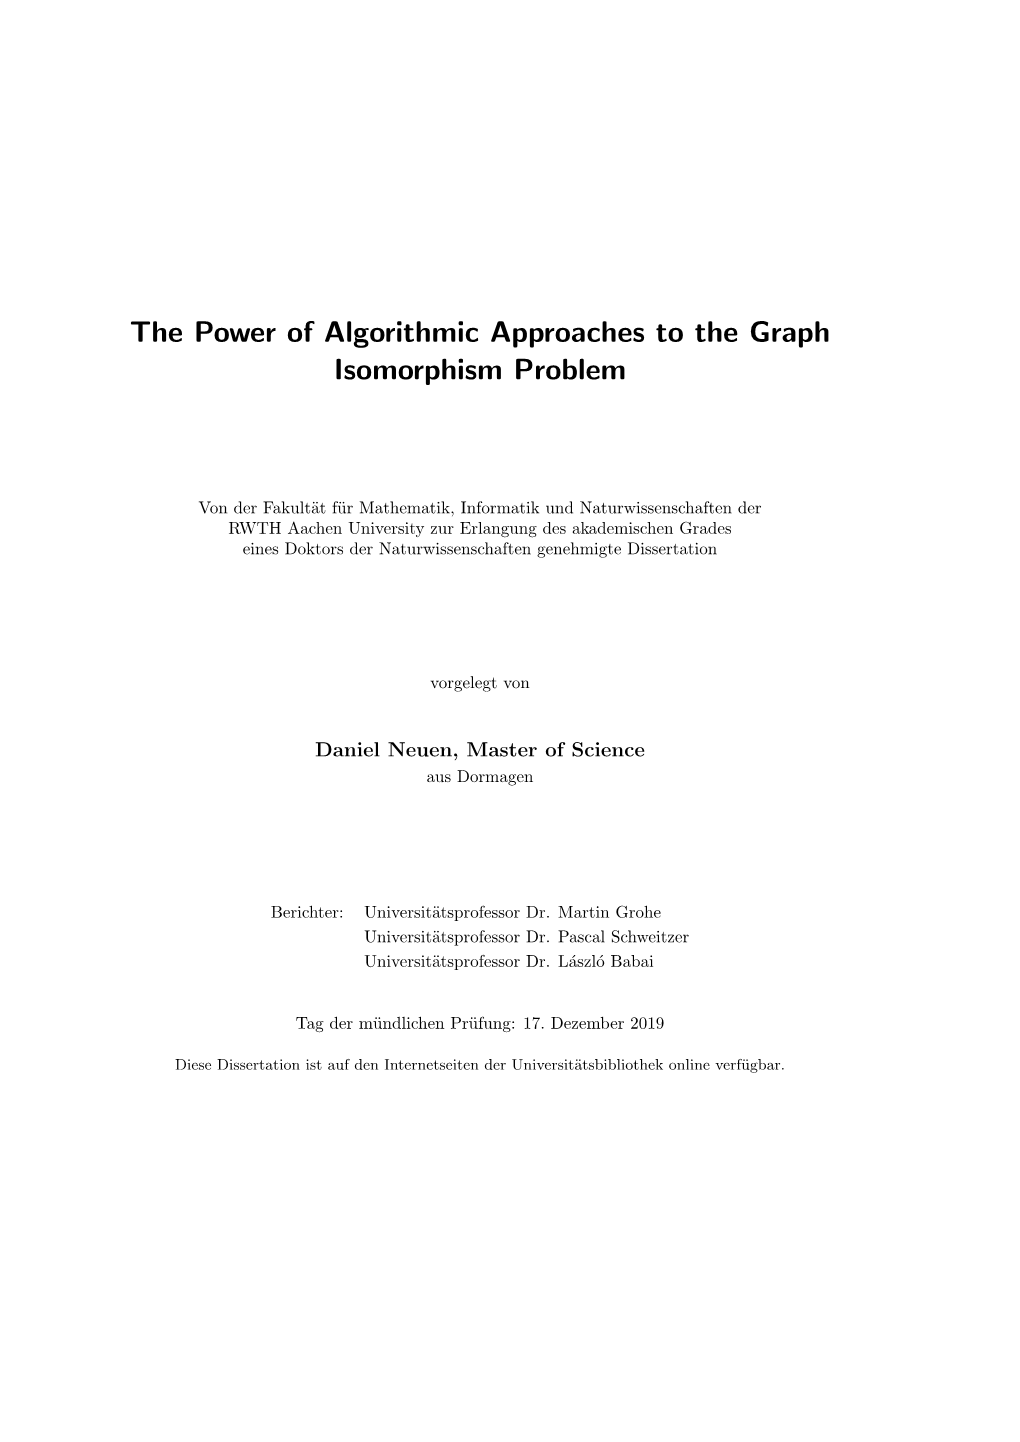 The Power of Algorithmic Approaches to the Graph Isomorphism Problem